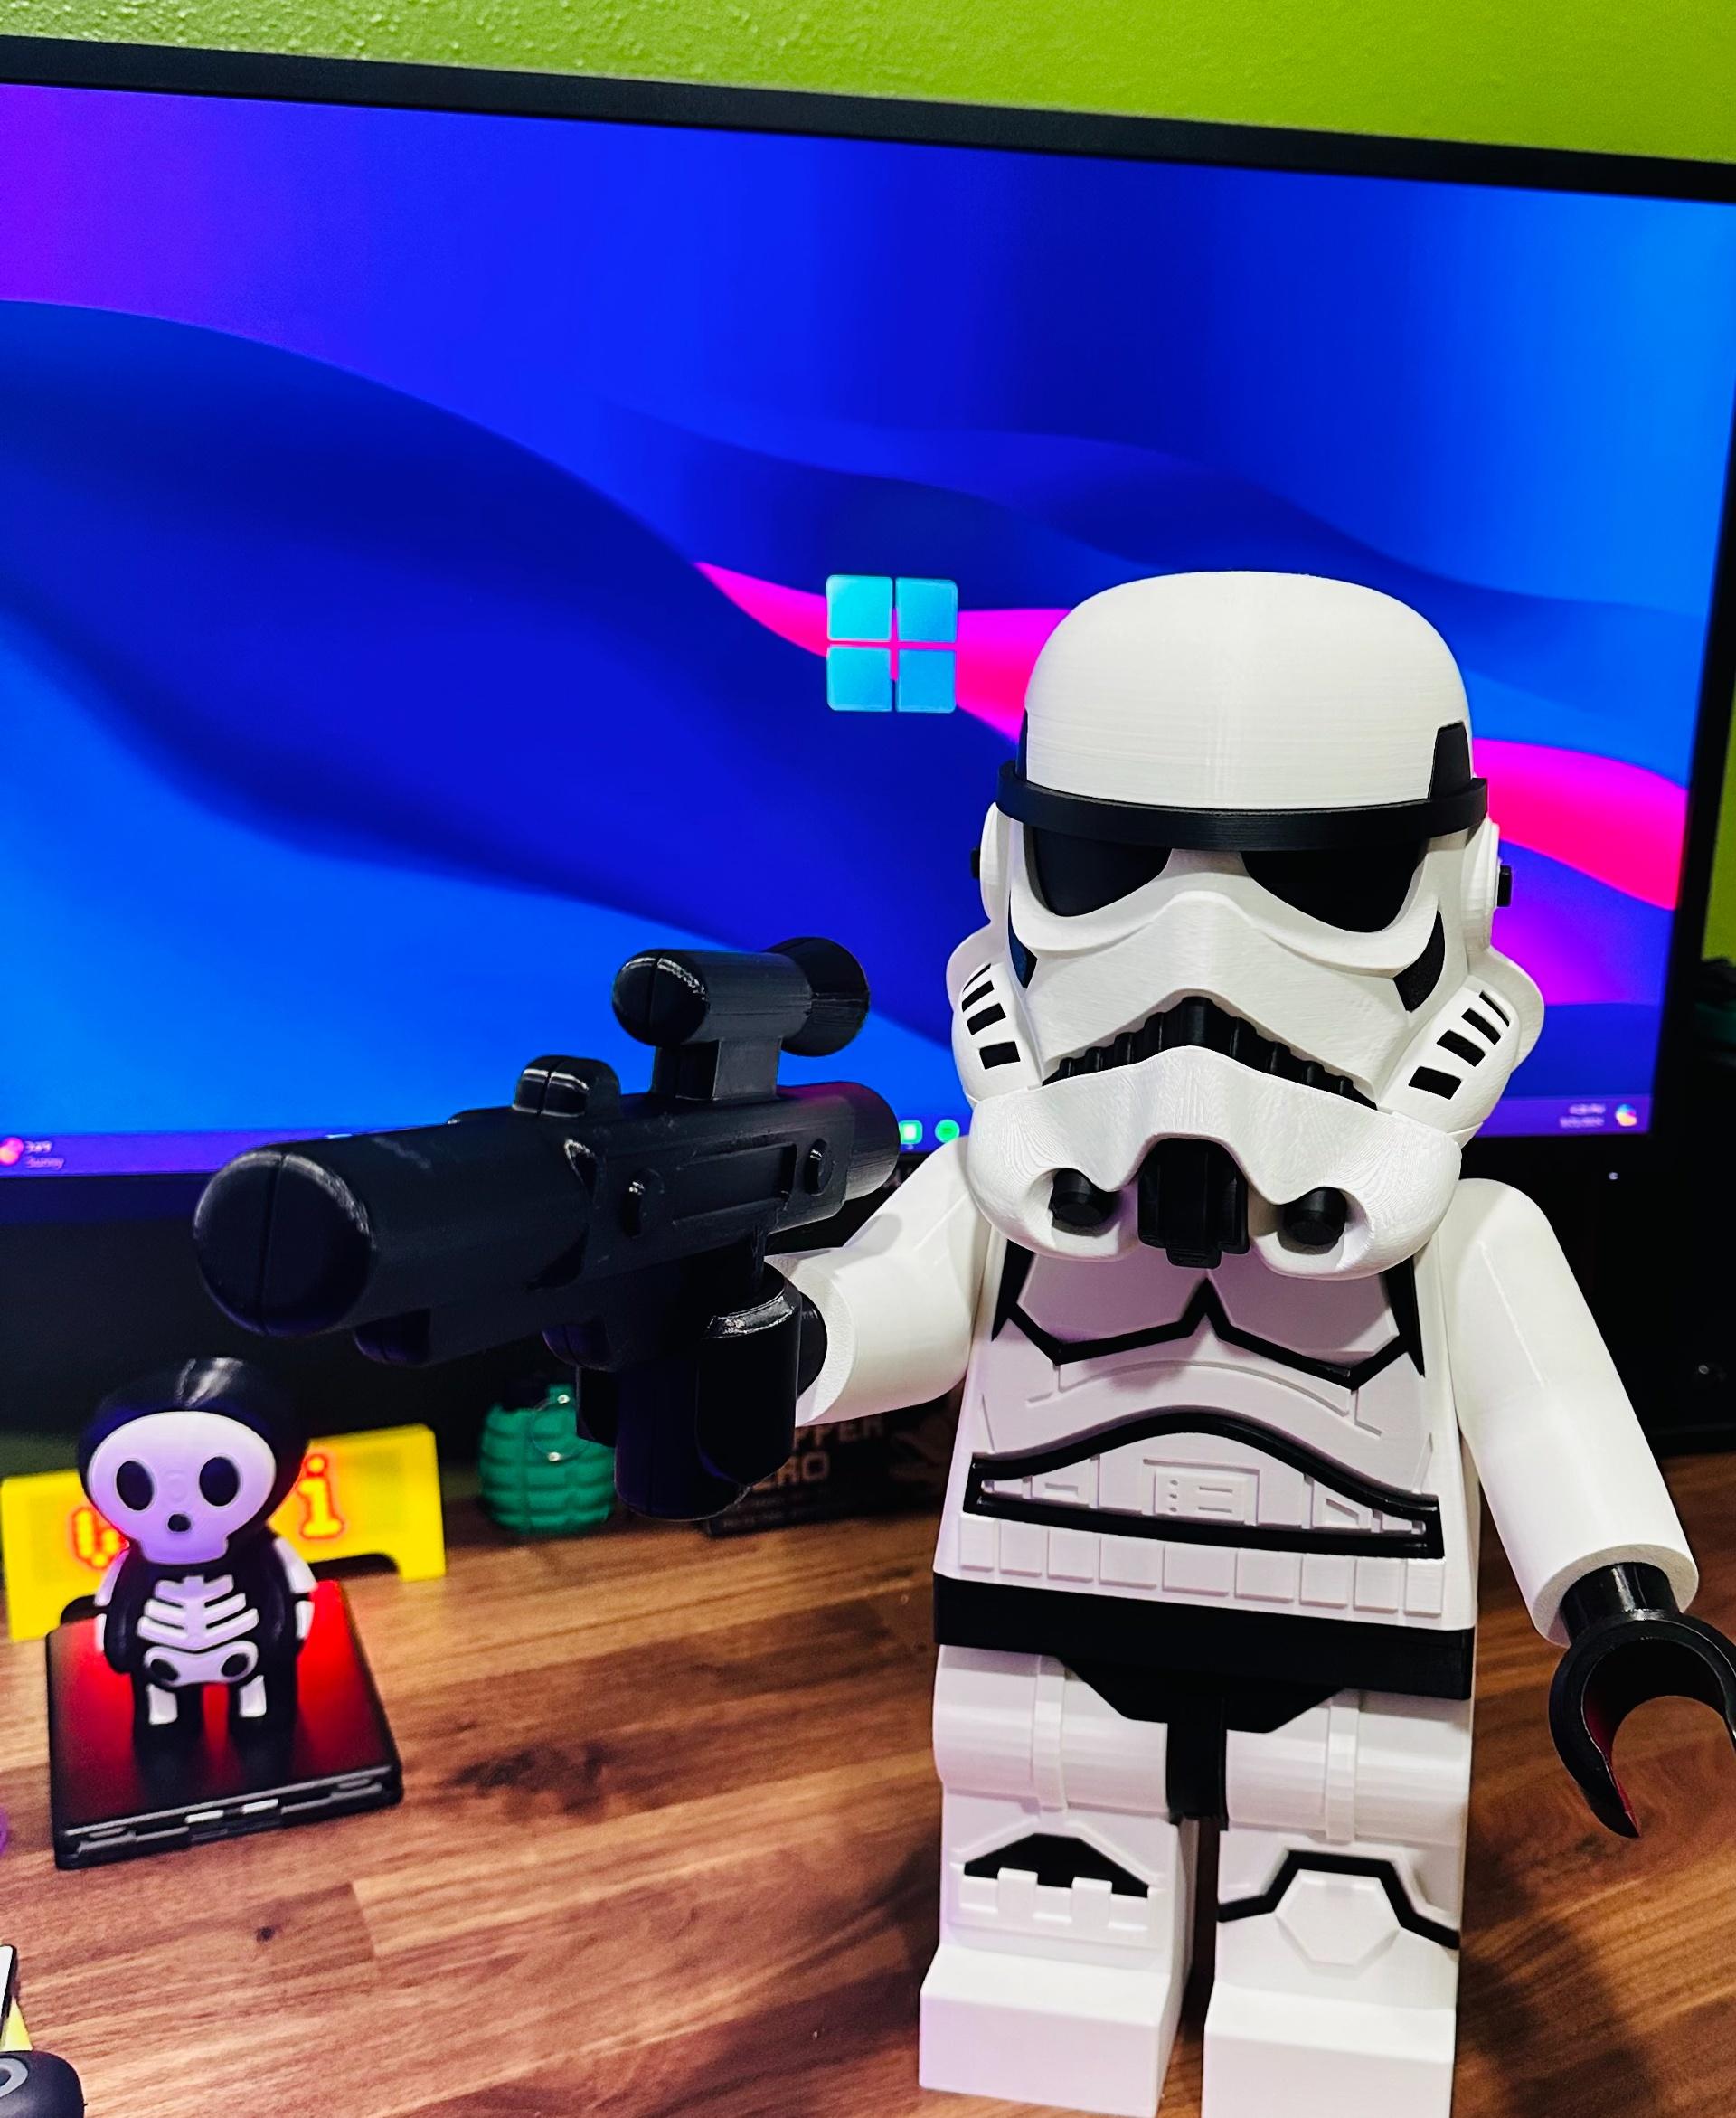 Stormtrooper (6:1 LEGO-inspired brick figure, NO MMU/AMS, NO supports, NO glue) - 175%. Absolutely epic! TY. Had some bleed on the head but I kinda like it. Some trial and error with fit. Fun project.  - 3d model